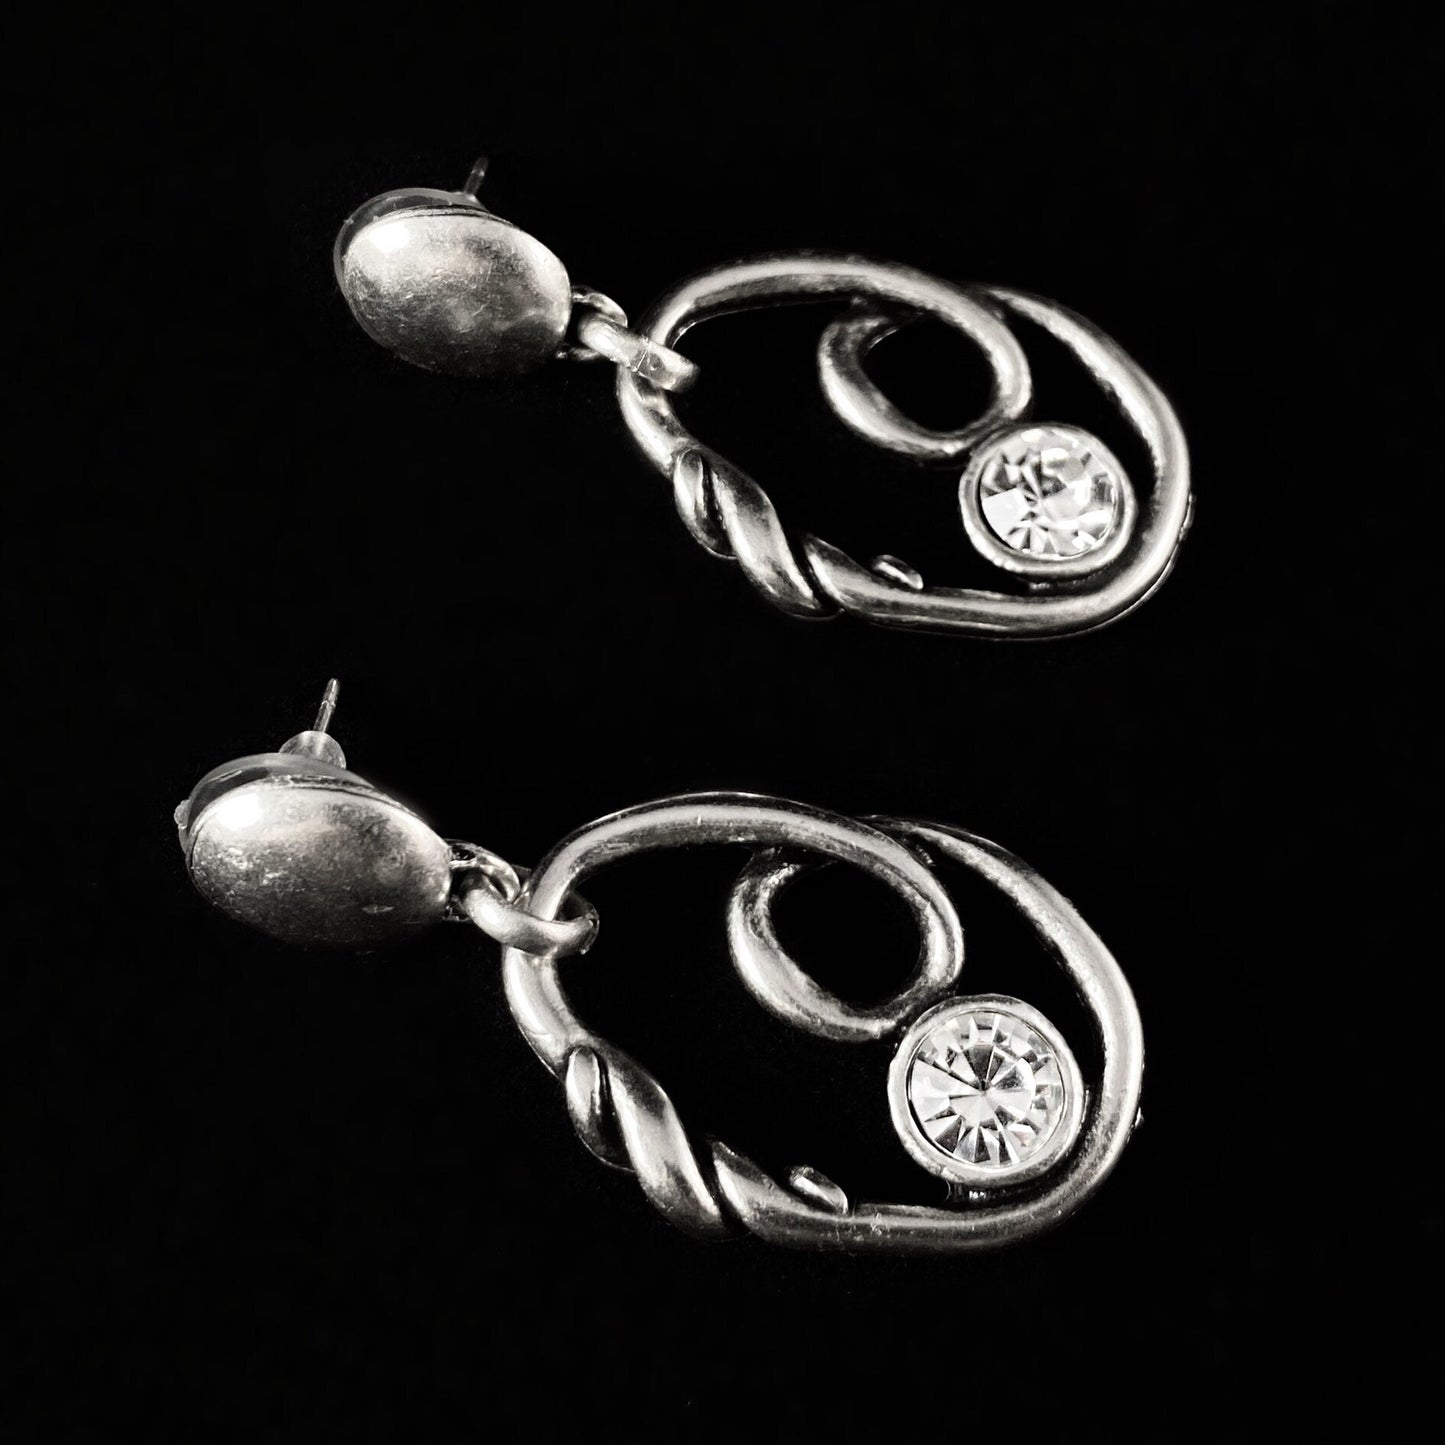 Silver Oval Swirl Drop Earrings with Clear Crystal Accent, Handmade, Nickel Free - Noir